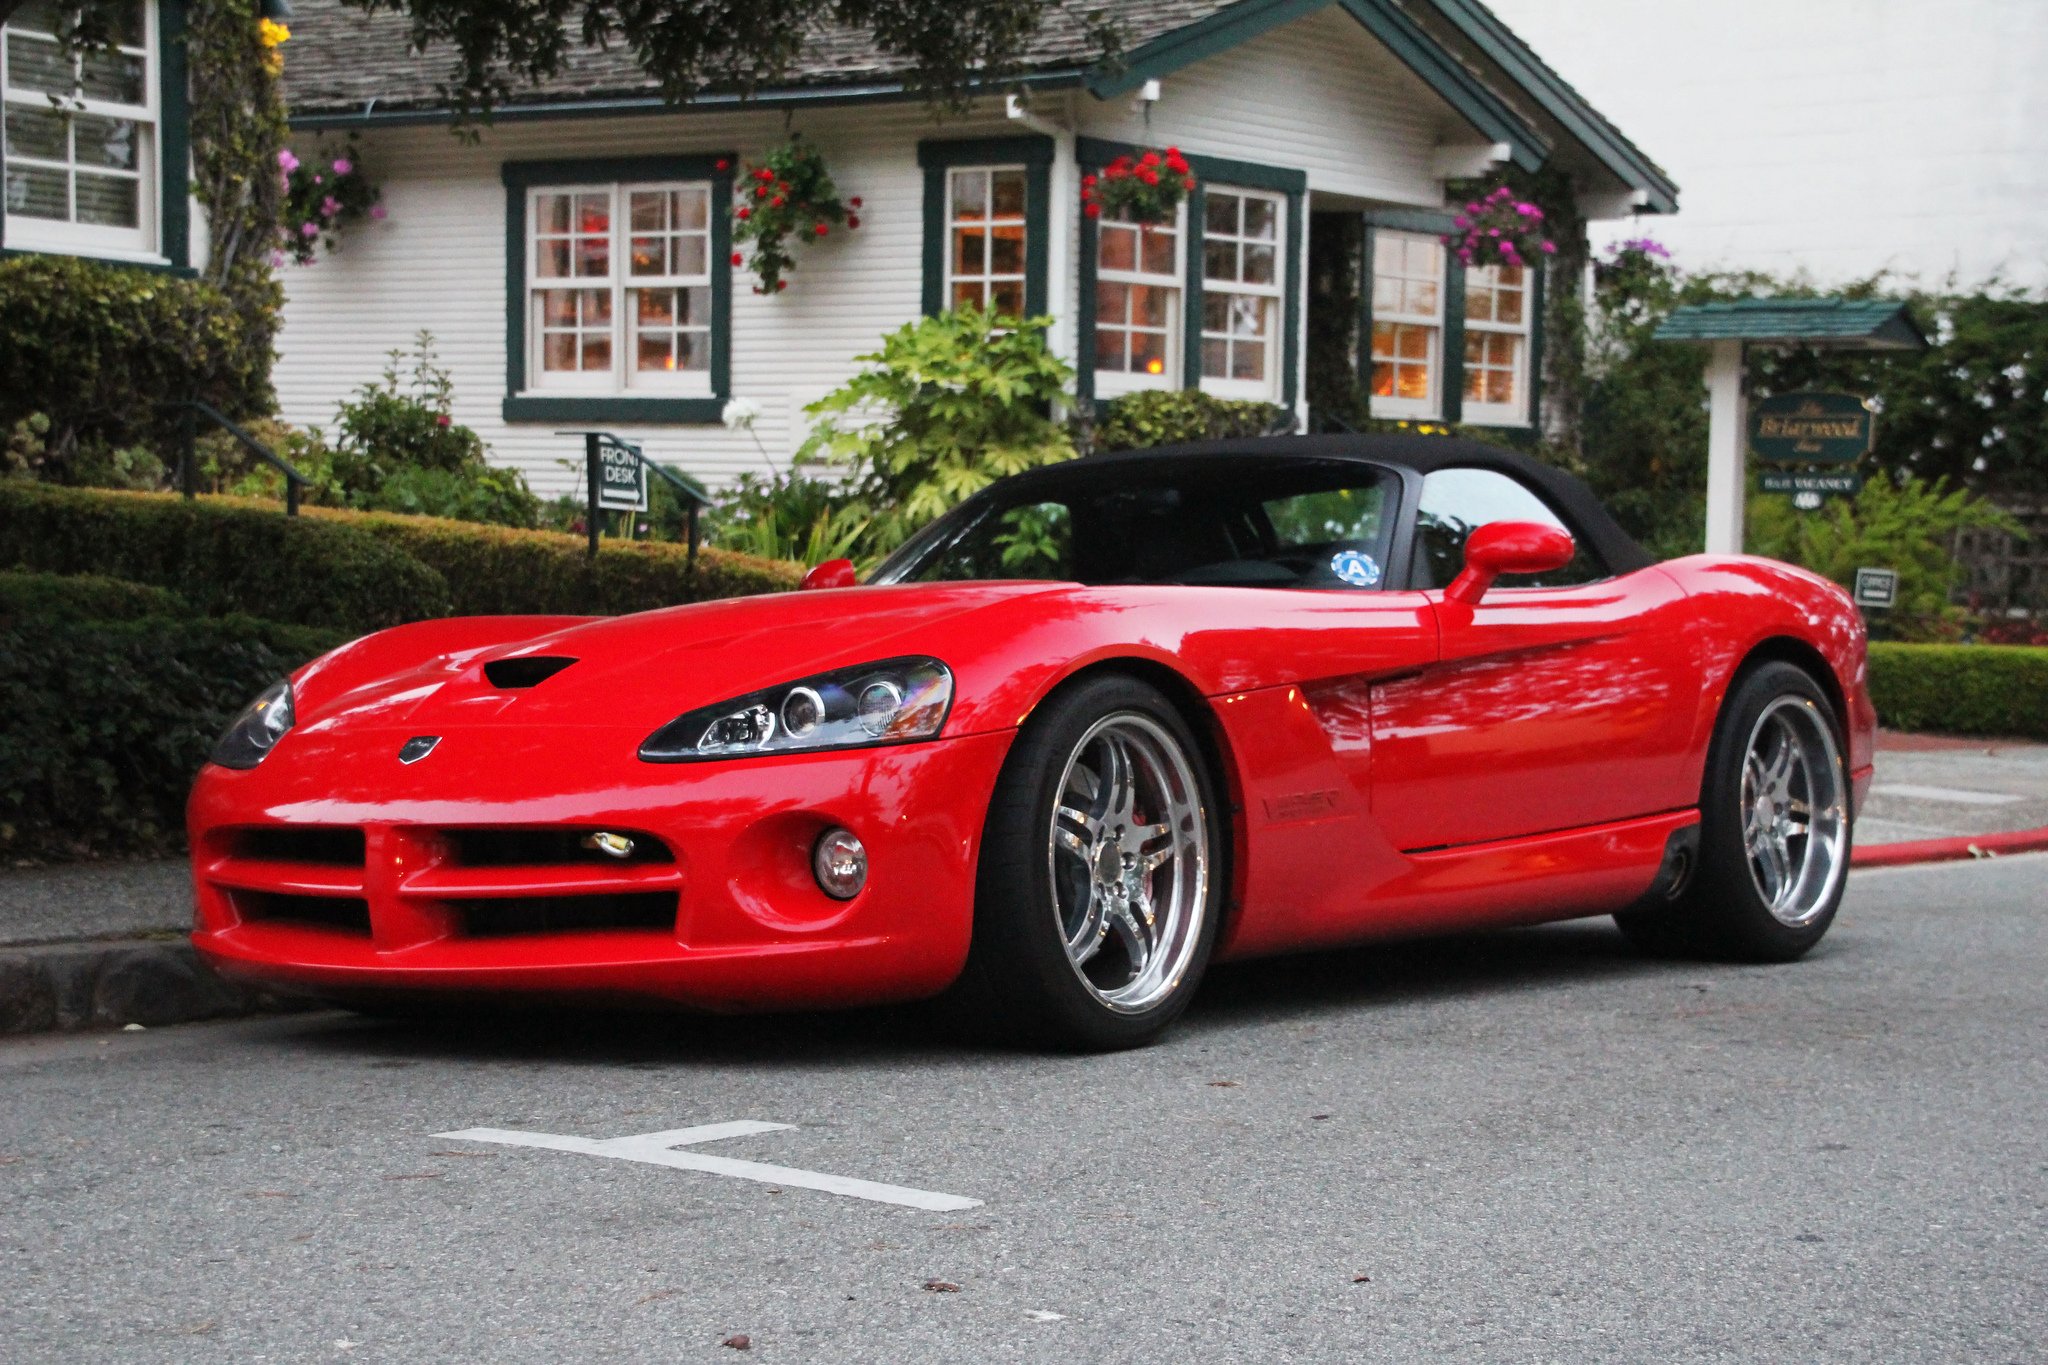 httpsdodge gts muscle srt supercar viper cars usa red 21